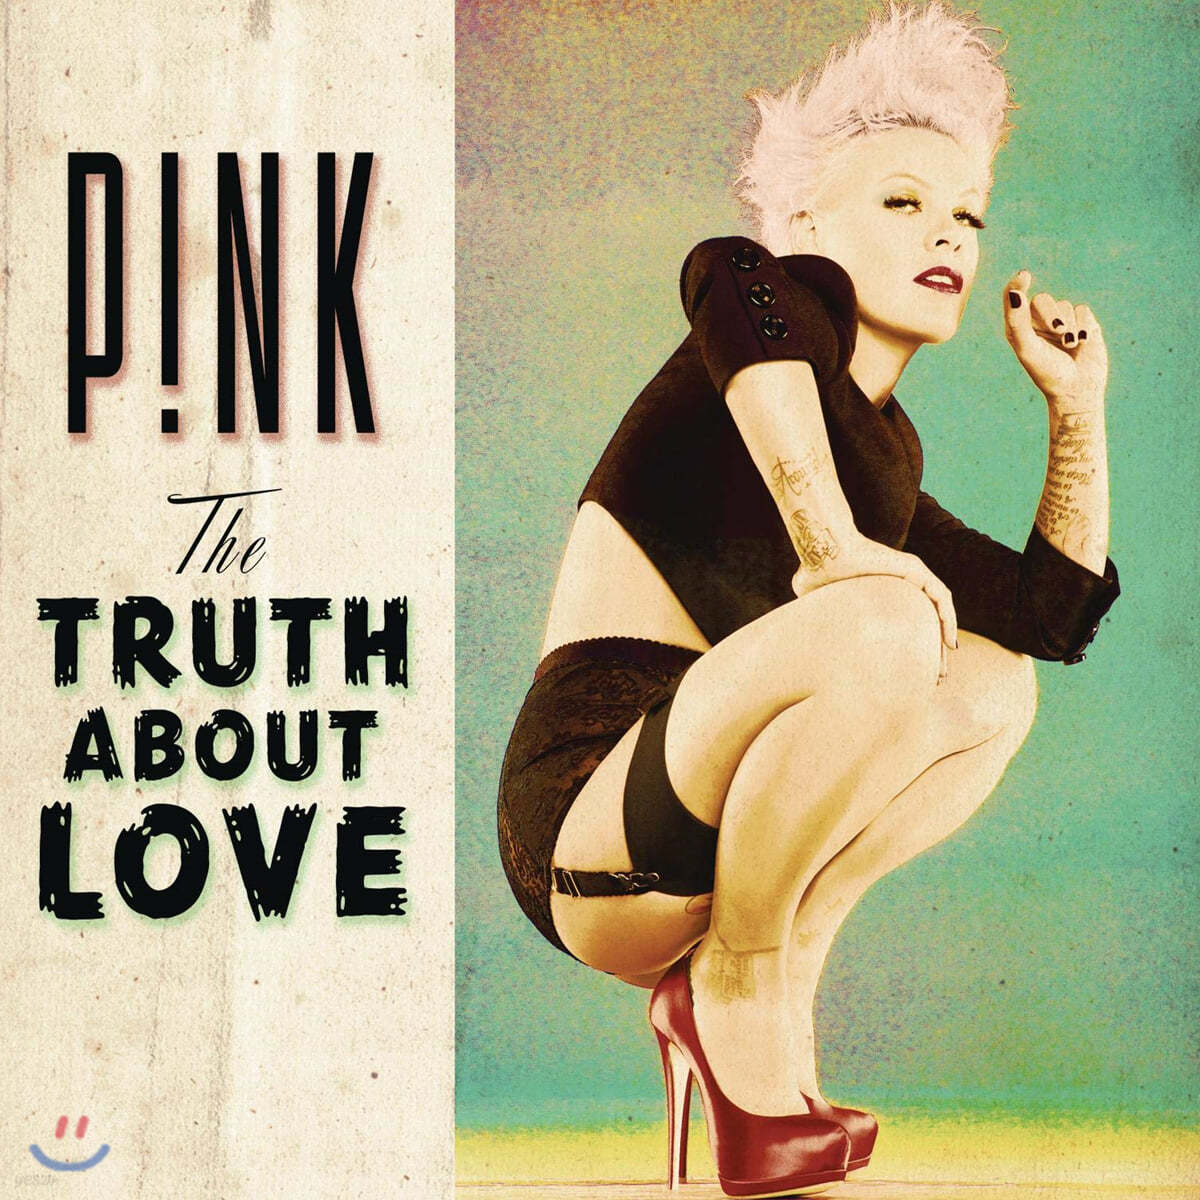 P!nk (Pink 핑크) - The Truth About Love [2LP] 